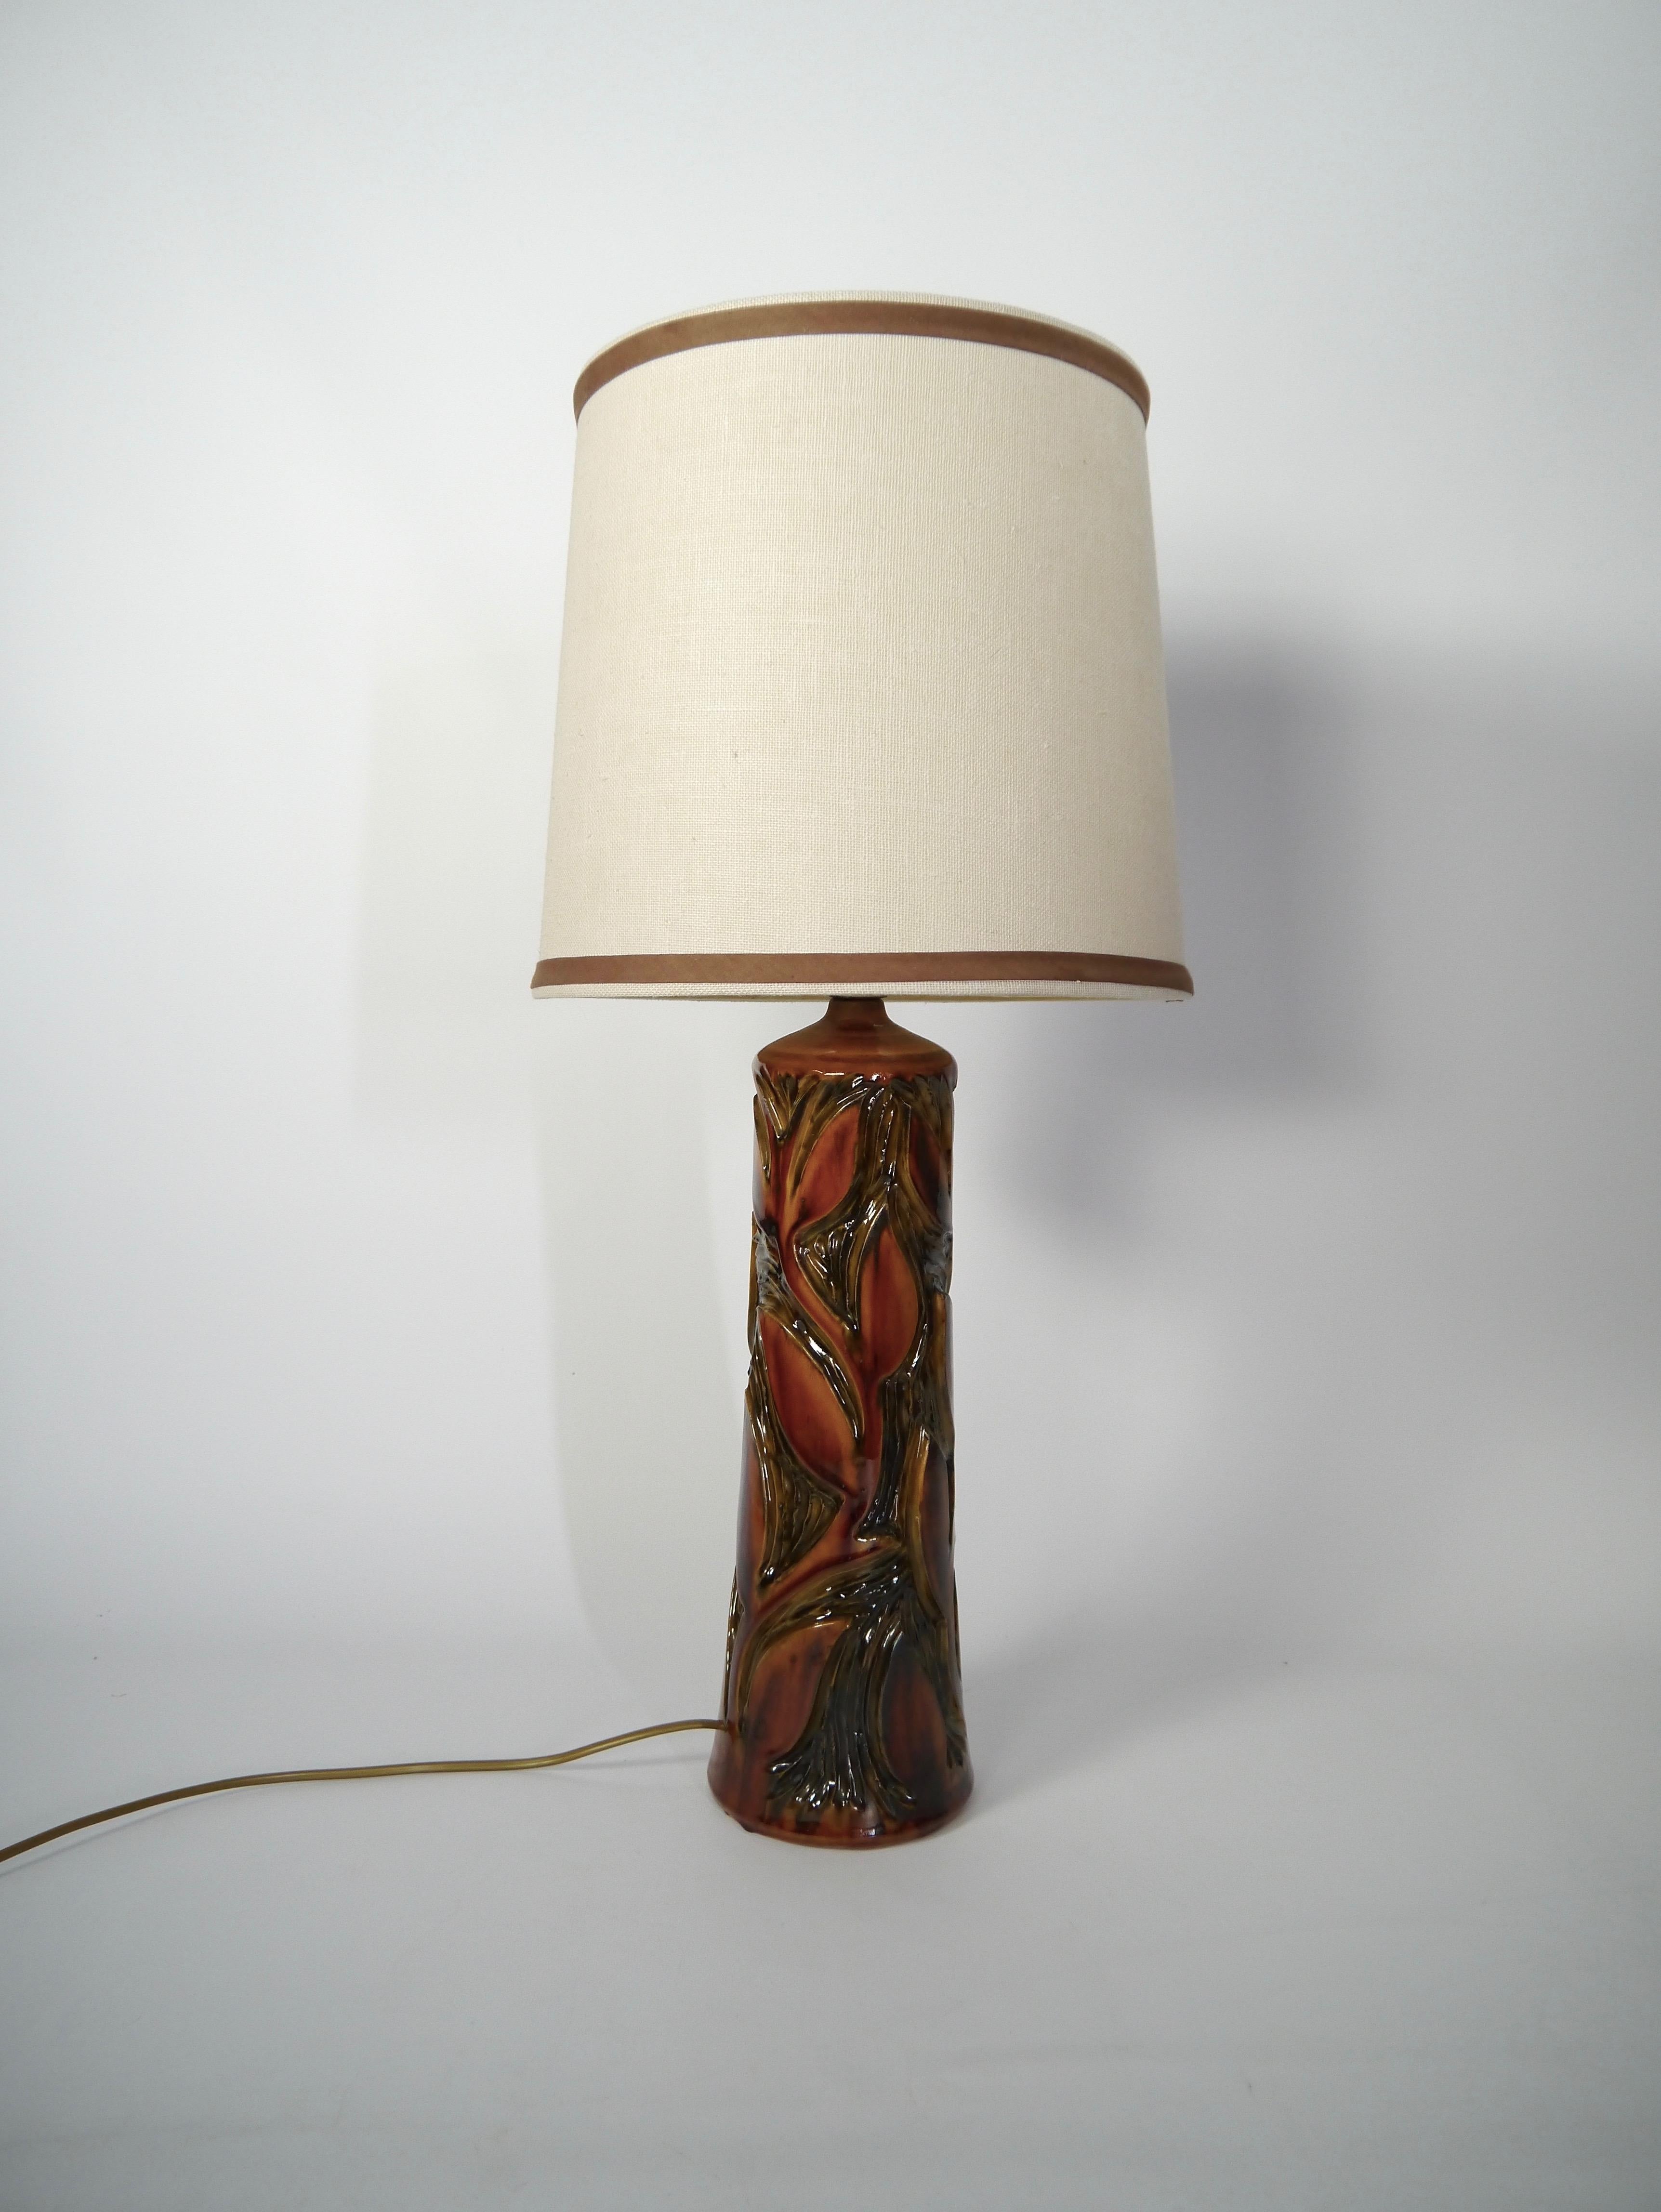 Tall ceramic table lamp handmade by Danish ceramist Rolf Tiemroth (1917-2009), during his time in Norway 1970s. Organic leaf / floral pattern, dark red to burnt orange and brown glazing.